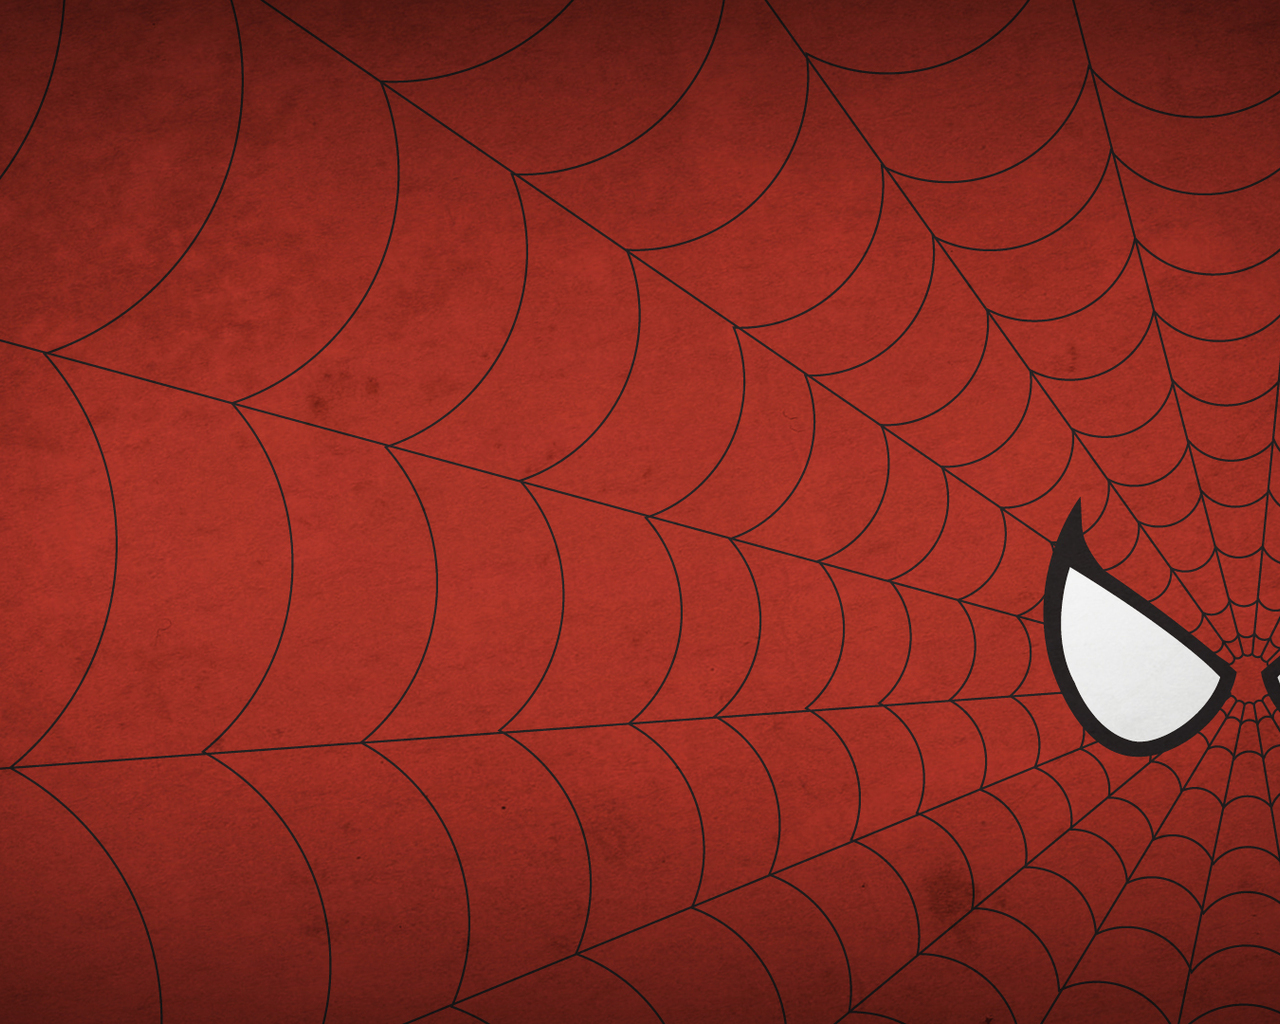 14125 download wallpaper spider man, background, pictures, red screensavers and pictures for free